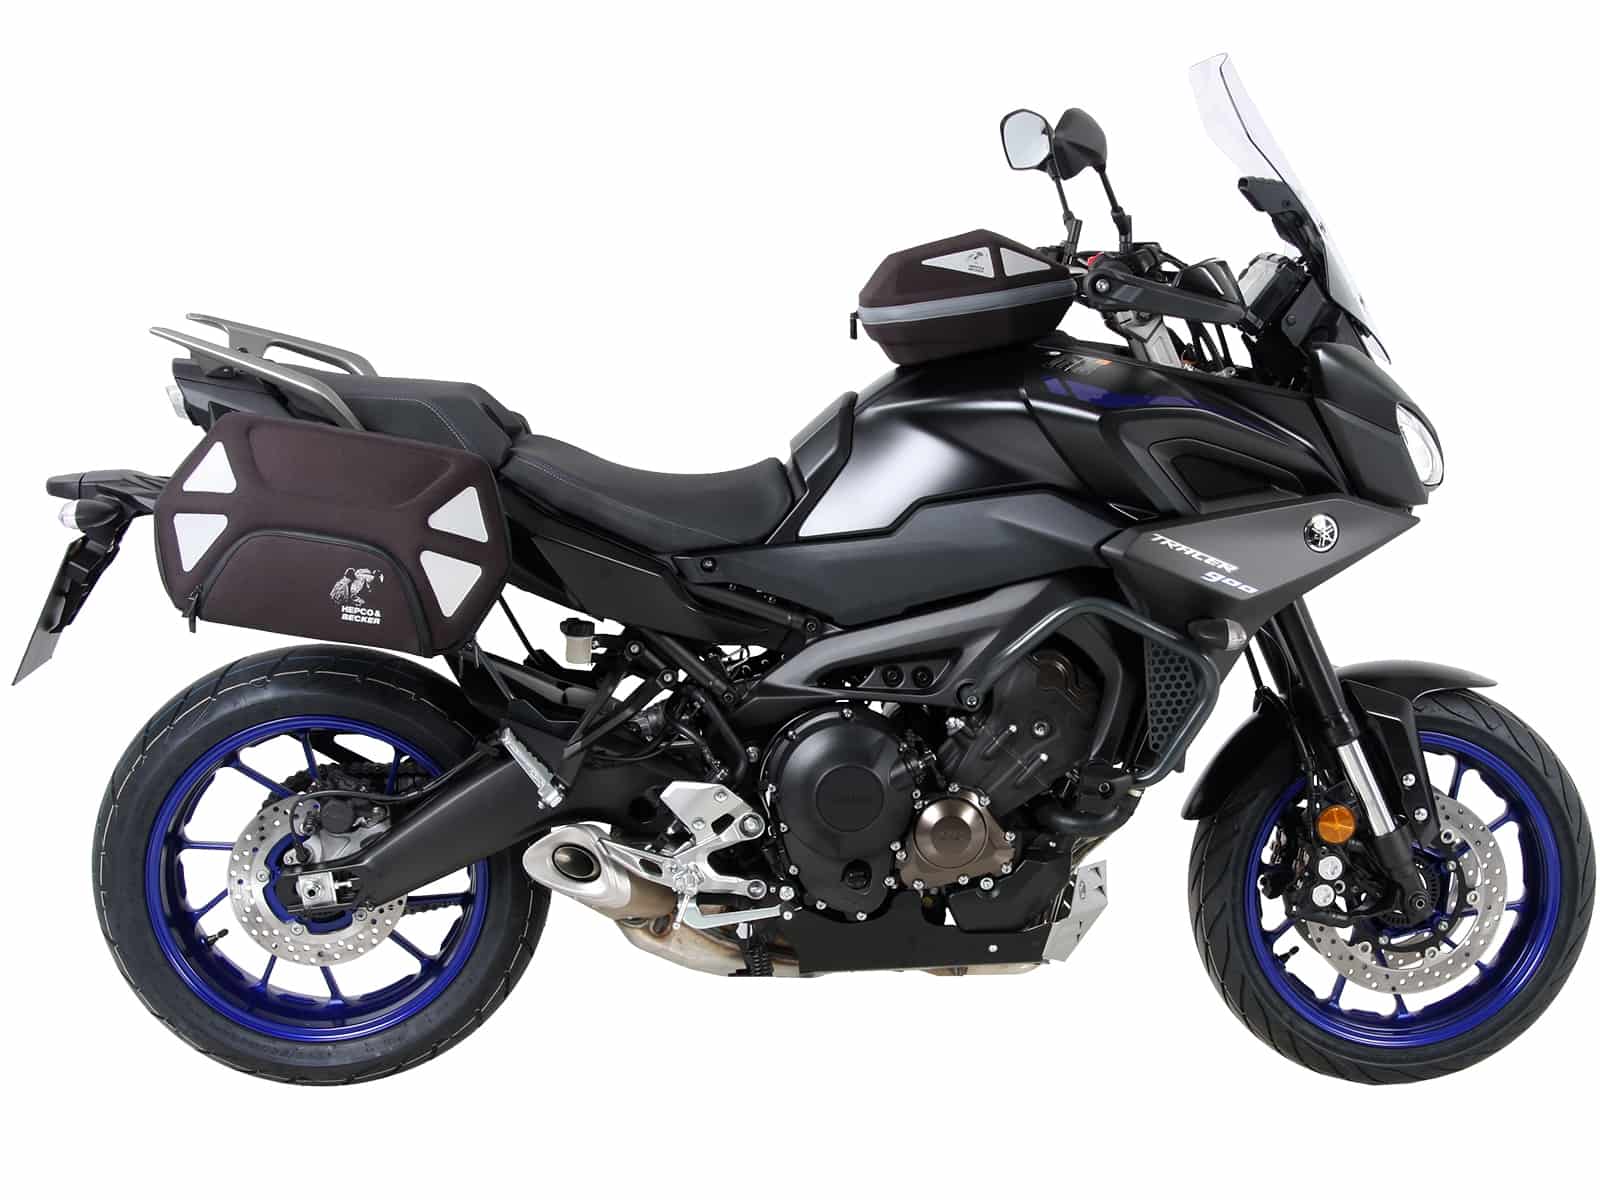 C-Bow sidecarrier for Yamaha Tracer 900/GT (2018-2020)